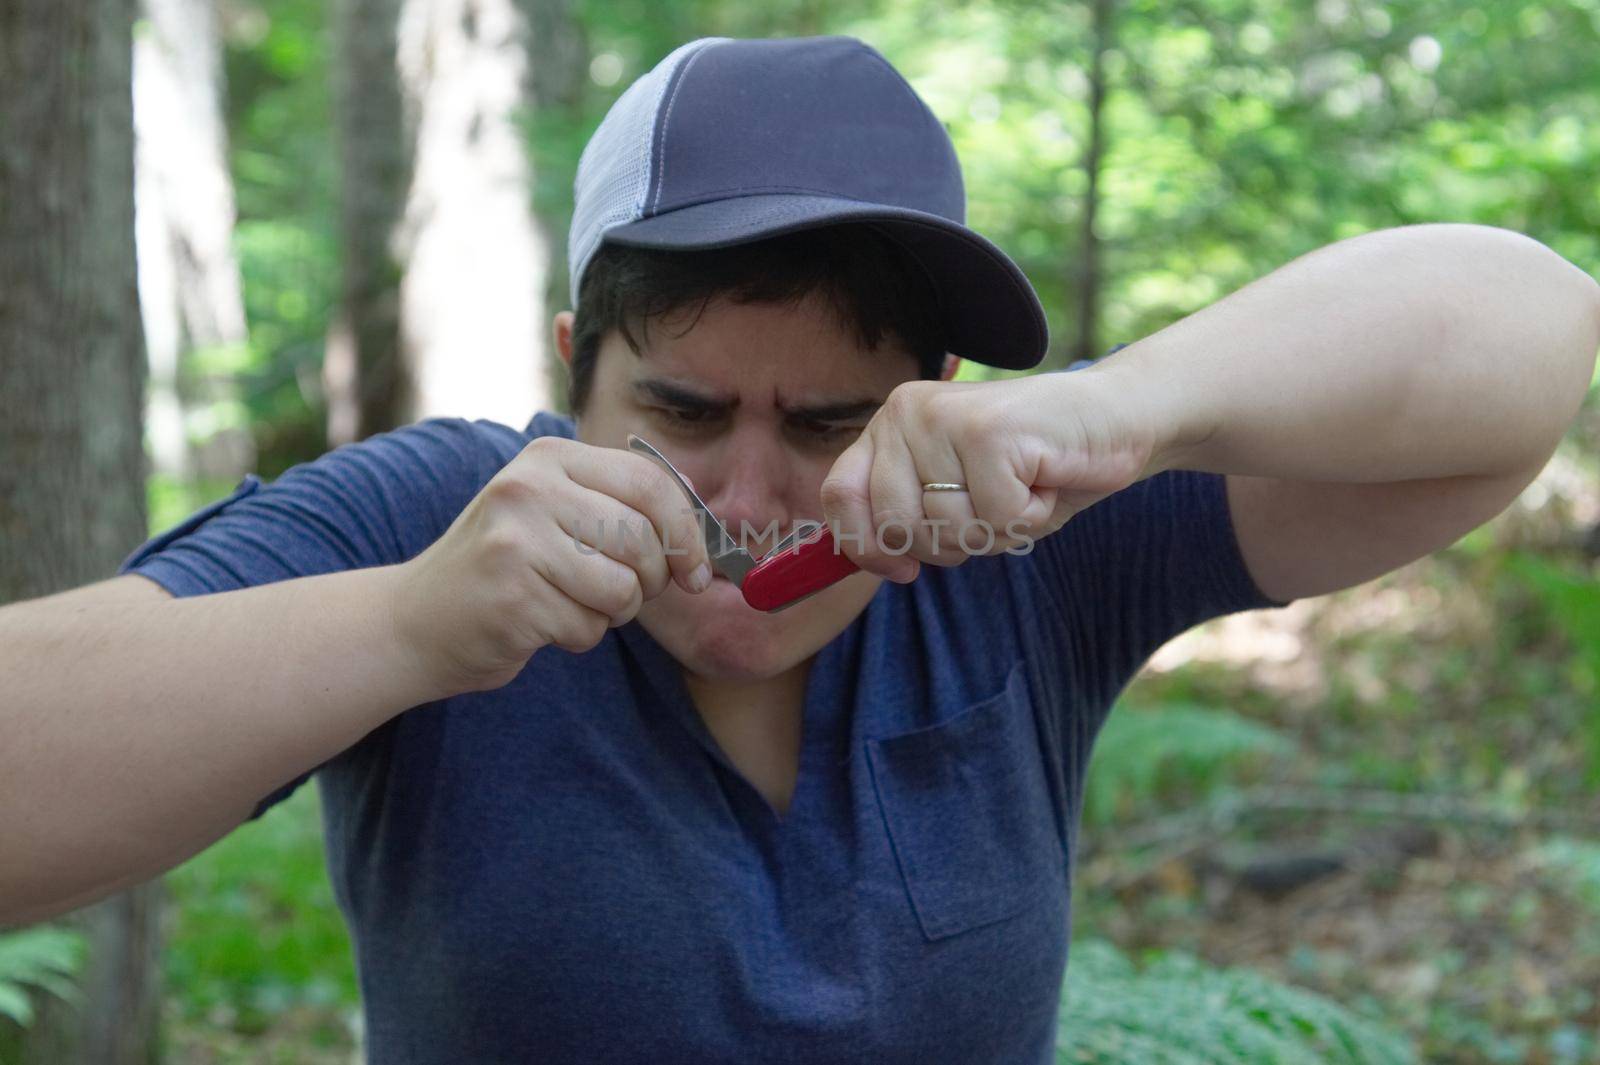 Woman looks confused as she tries to use a jack knife or utility tool in the woods